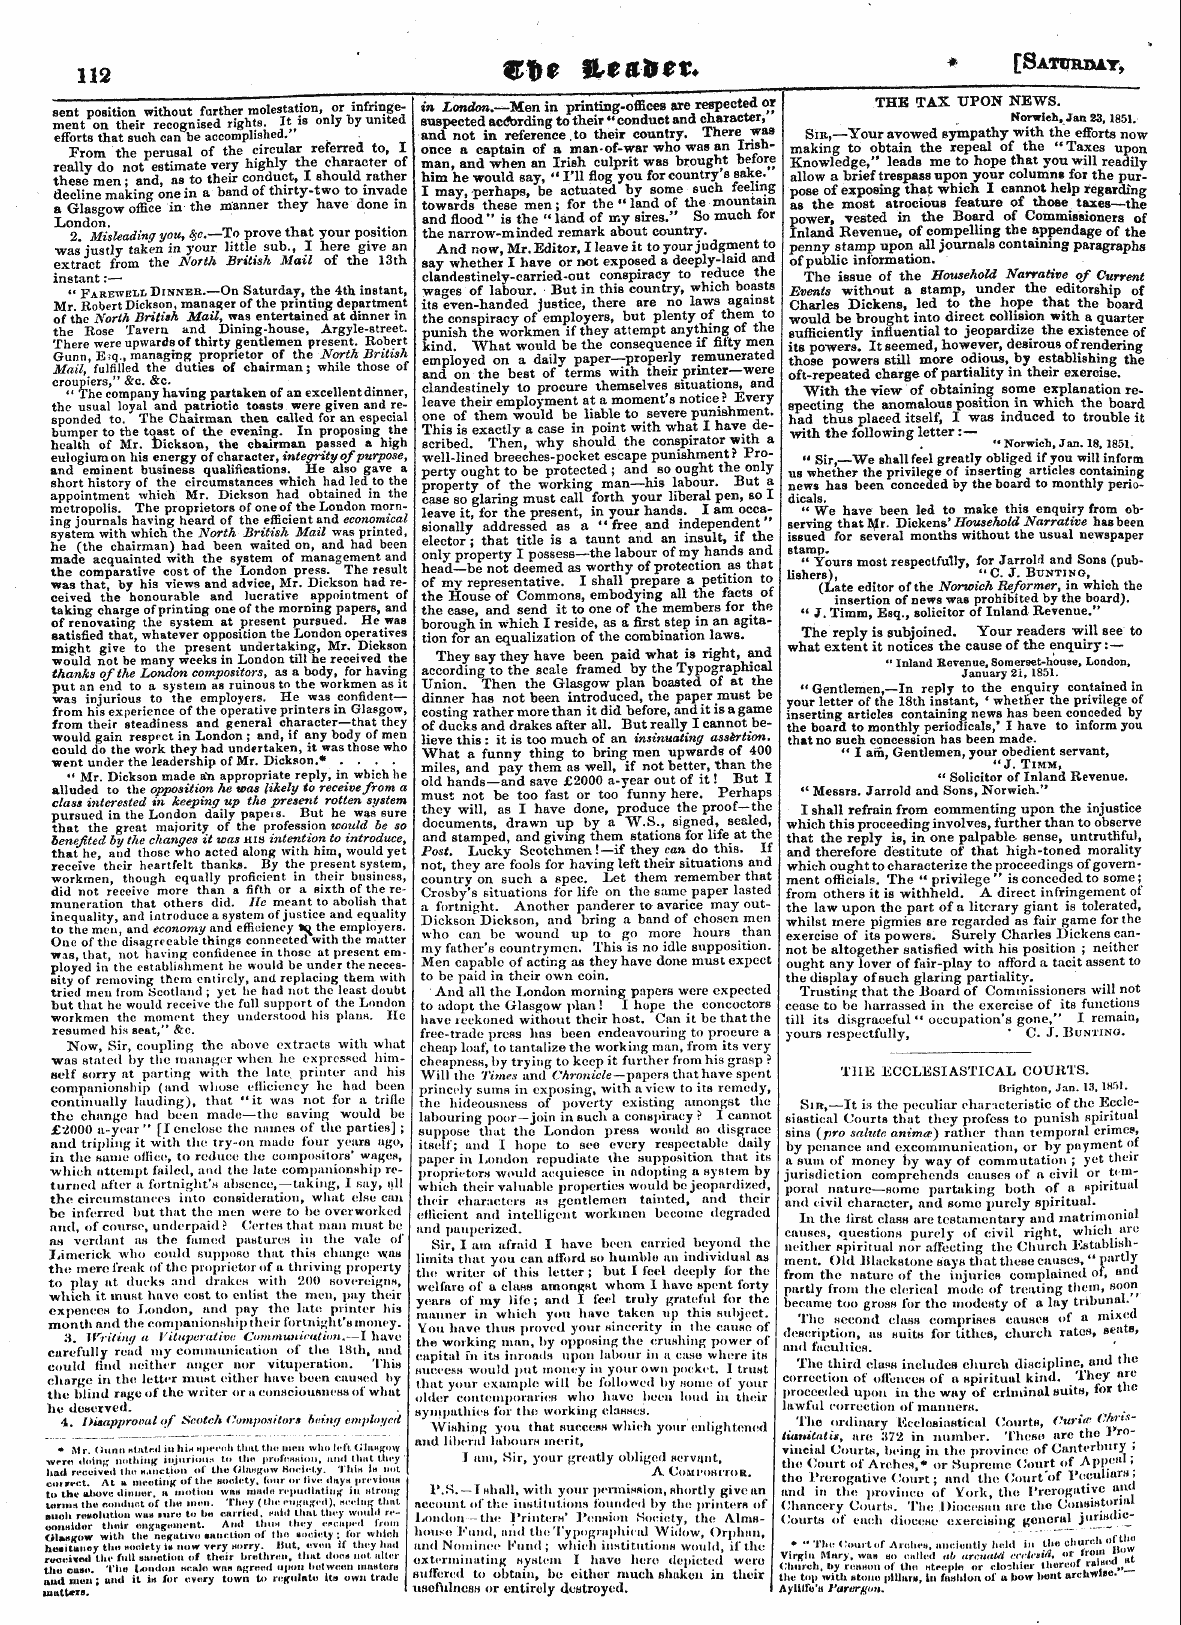 Leader (1850-1860): jS F Y, Country edition - The Tax Upon News. Norwich, Jan 23,1851....